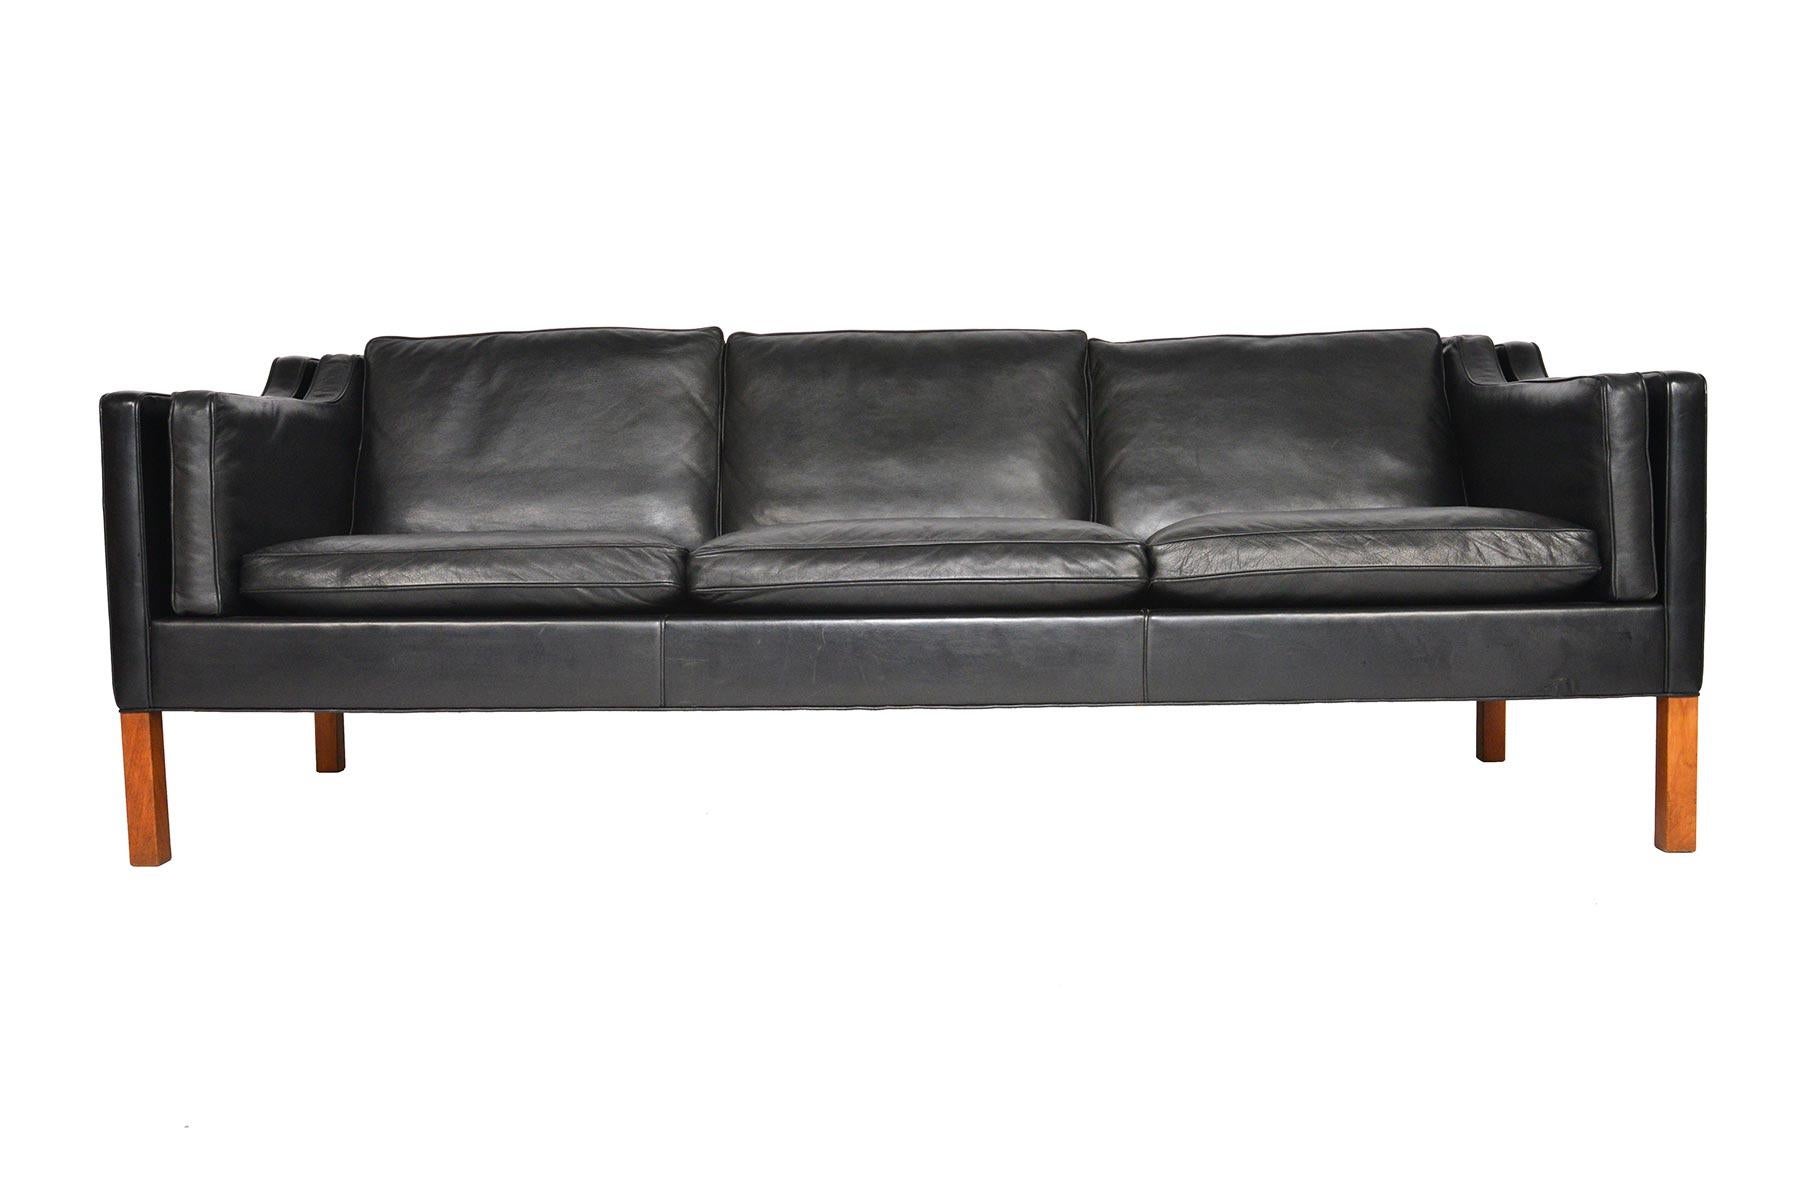 This Danish modern midcentury model 2213 three seat black leather sofa was designed by Børge Mogensen for Frederica Furniture. A staple of modern decor, this piece set a new standard for simplistic, timeless design. This completely original sofa is